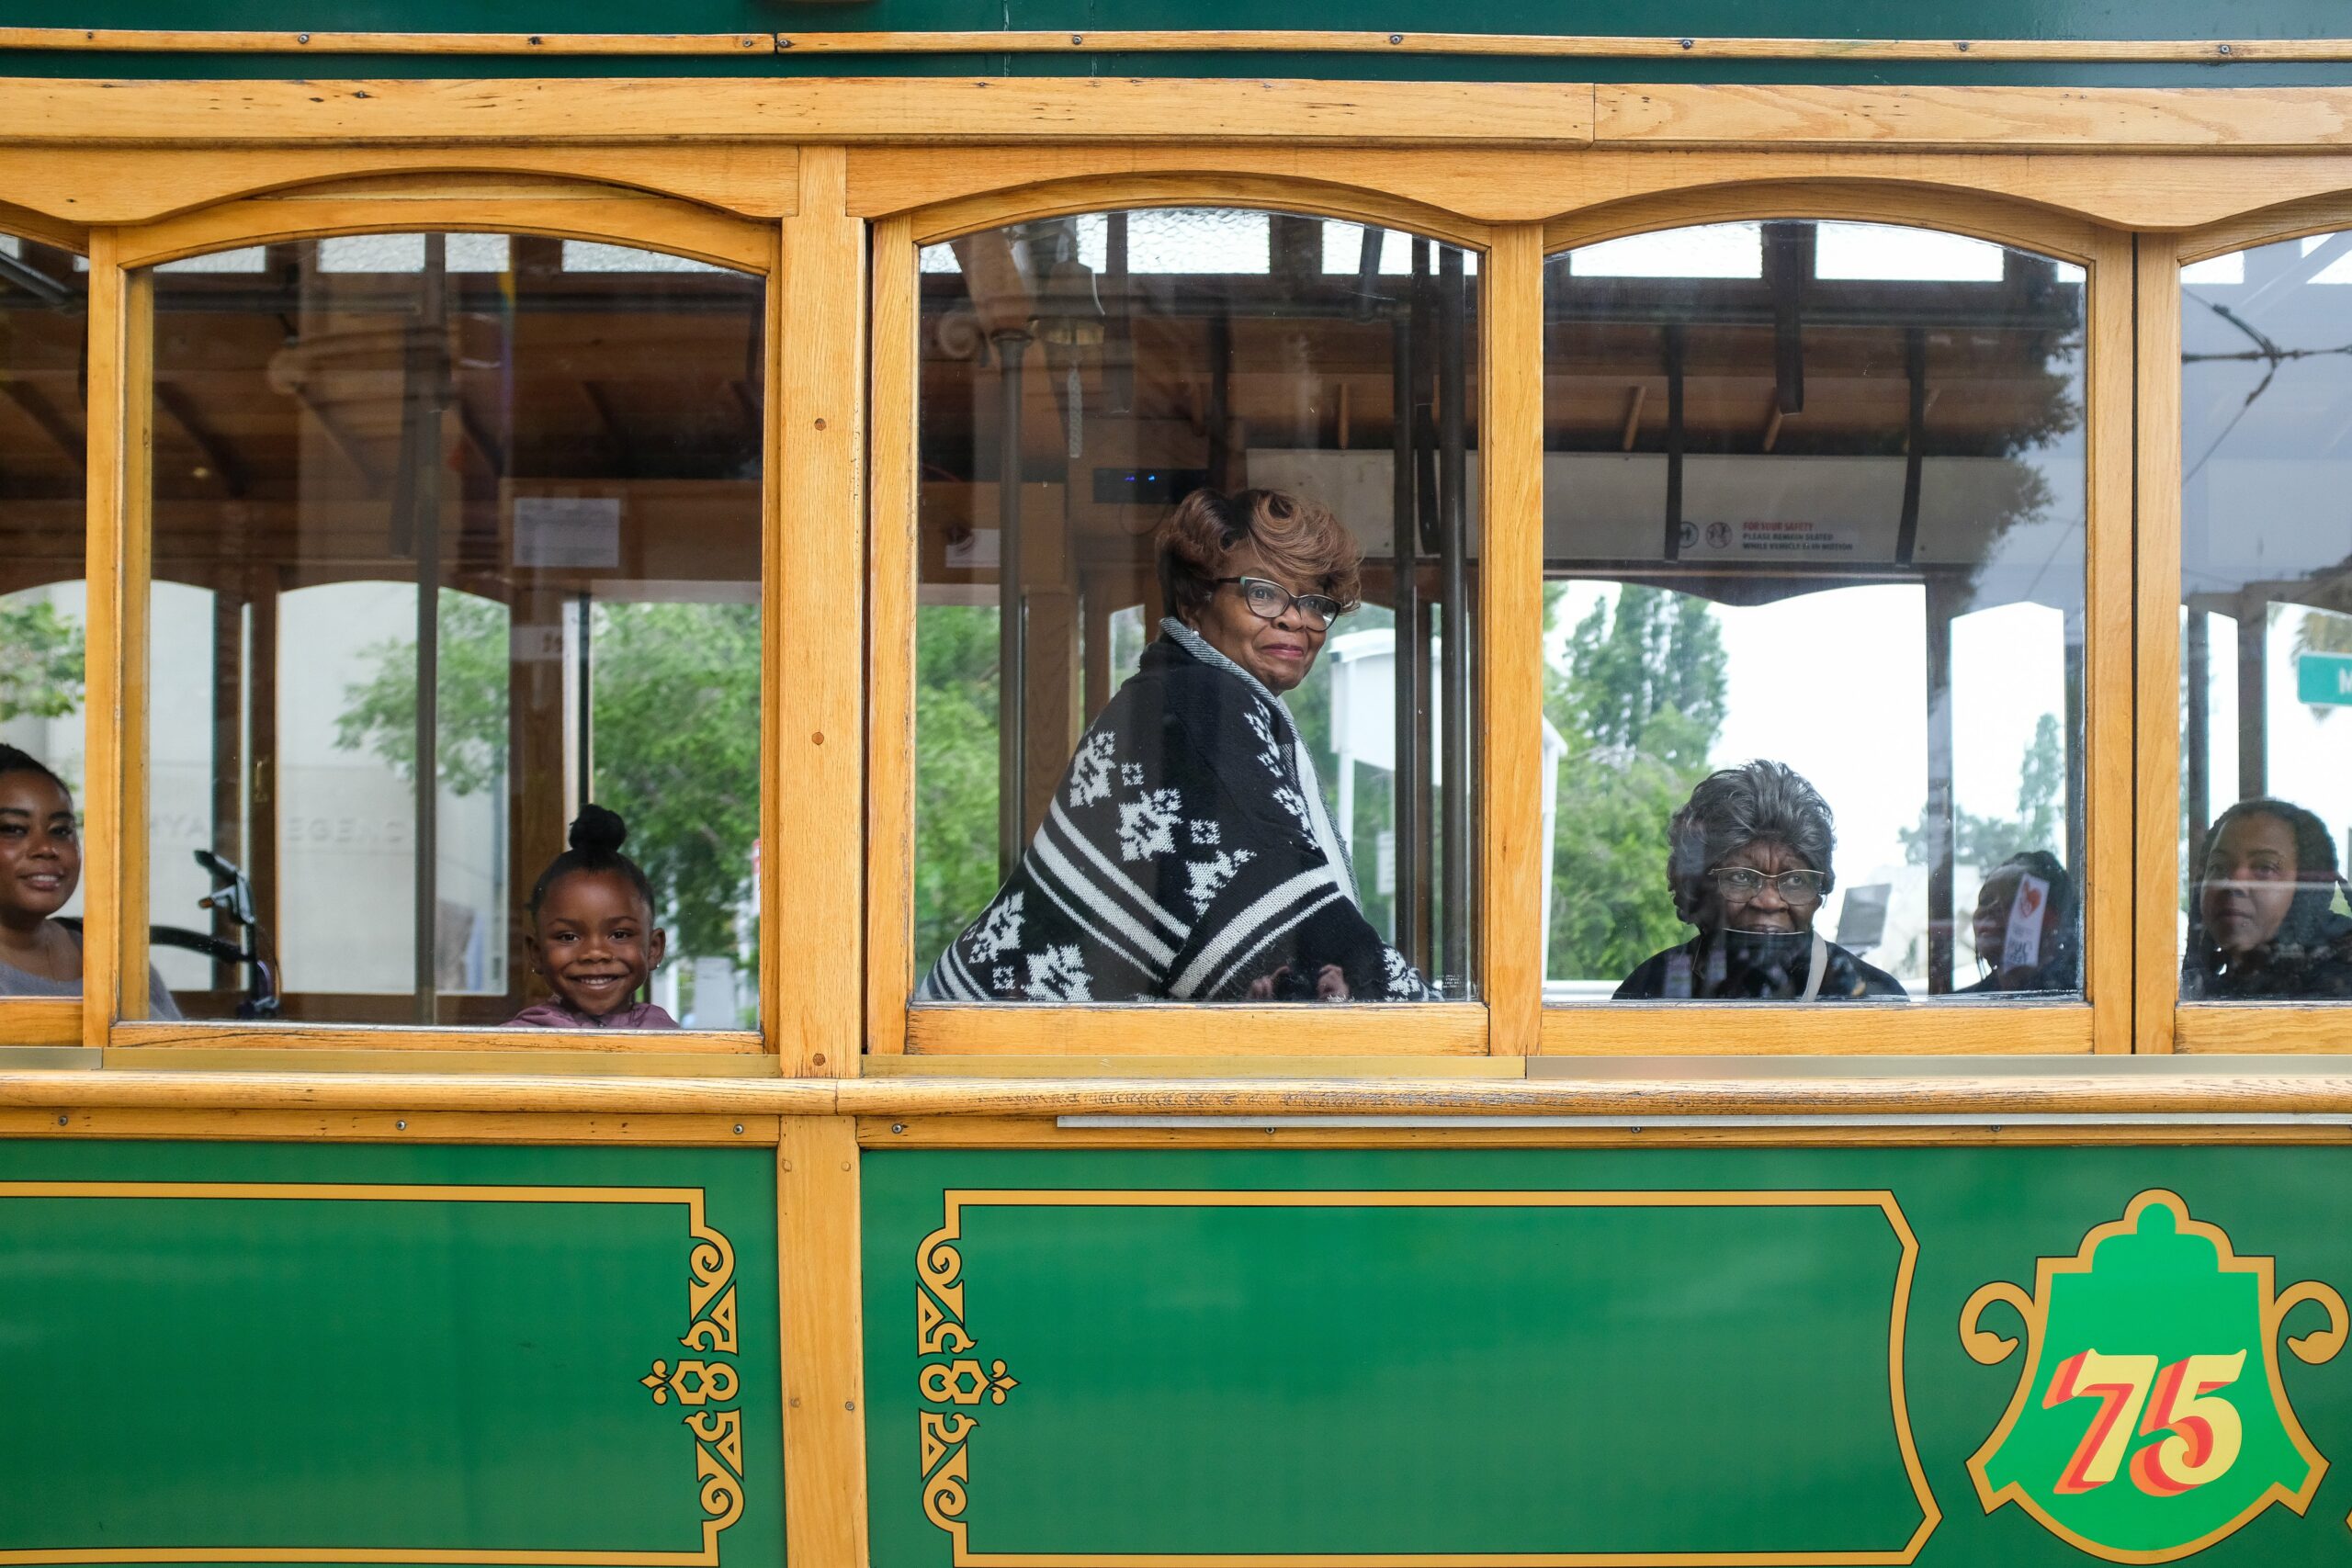 Passengers smile inside a vintage green and yellow trolley car.